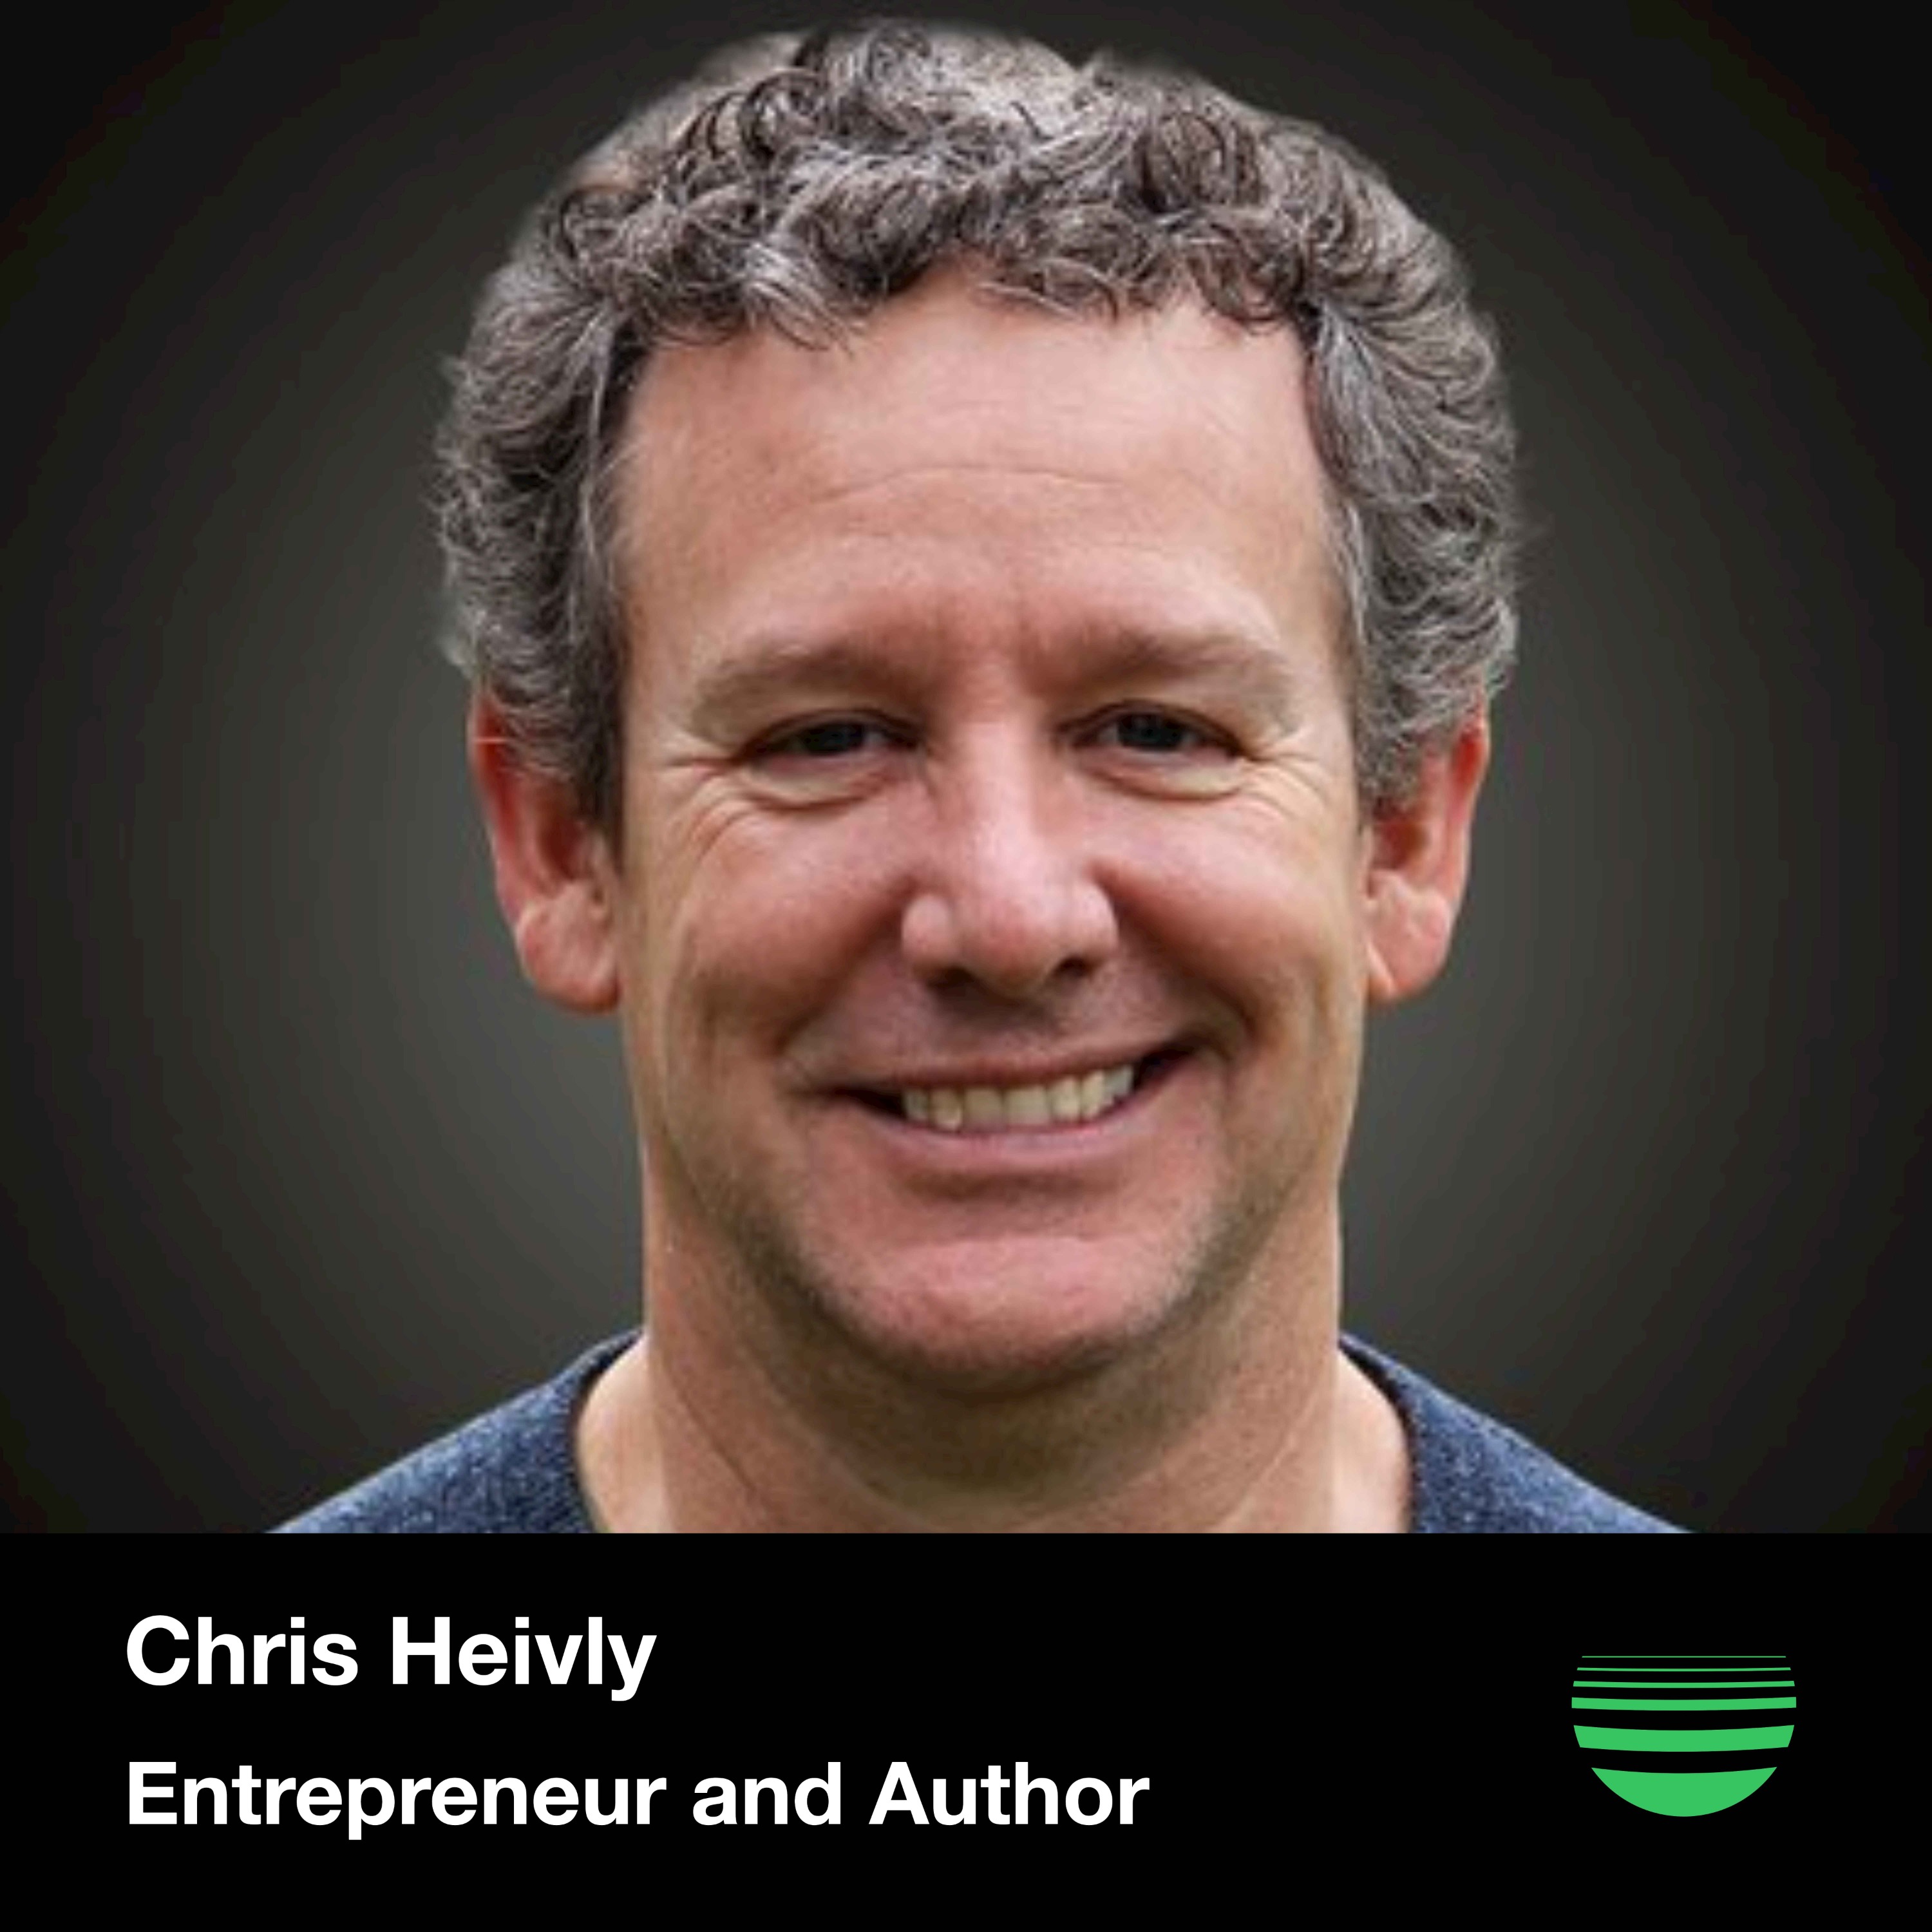 Startup Community Builder Chris Heivly and his Newest “Build the Fort” Book